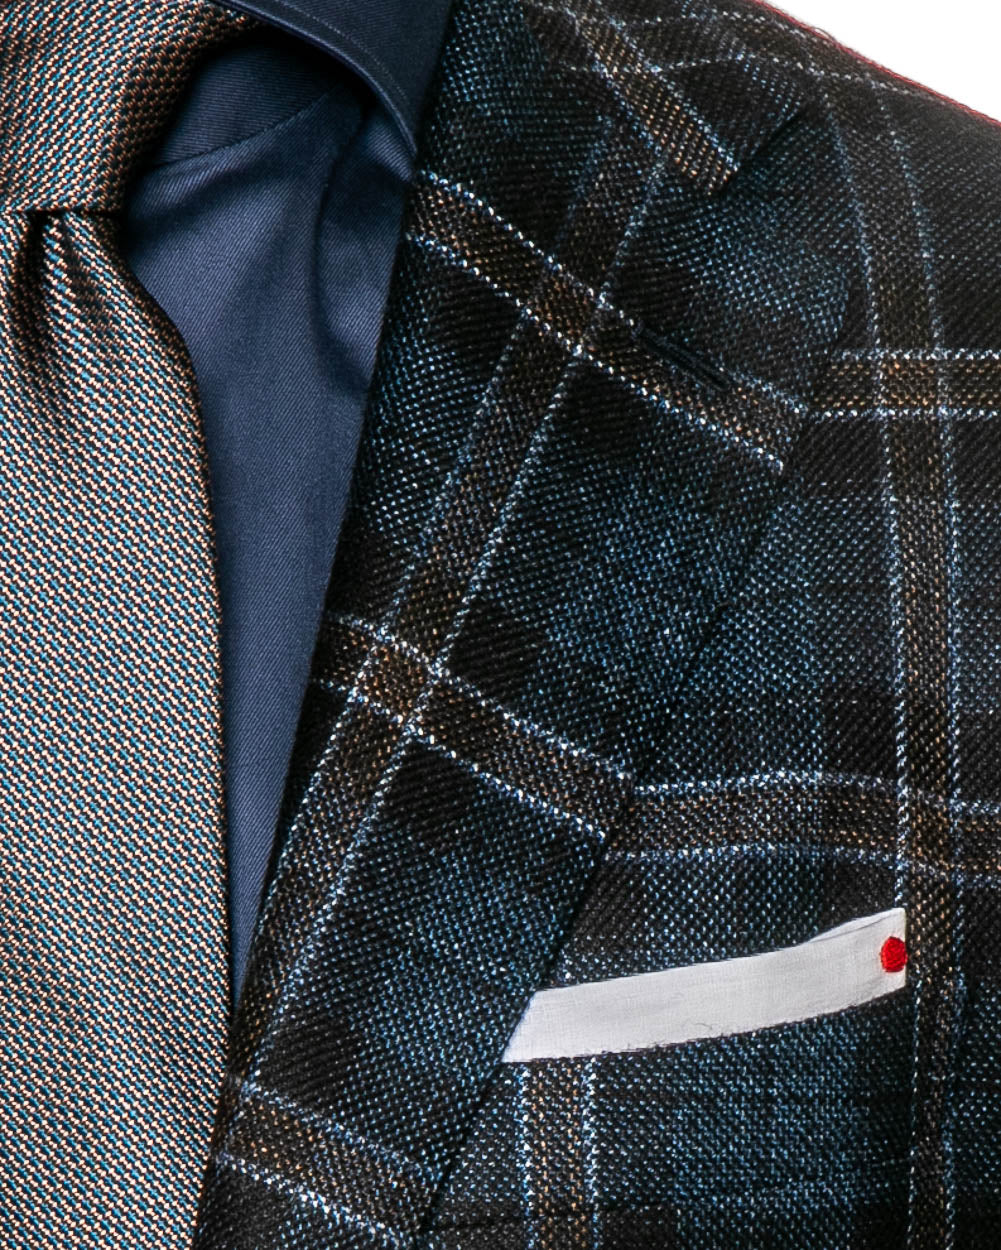 Royal Blue Plaid with Rust Windowpane Sportcoat